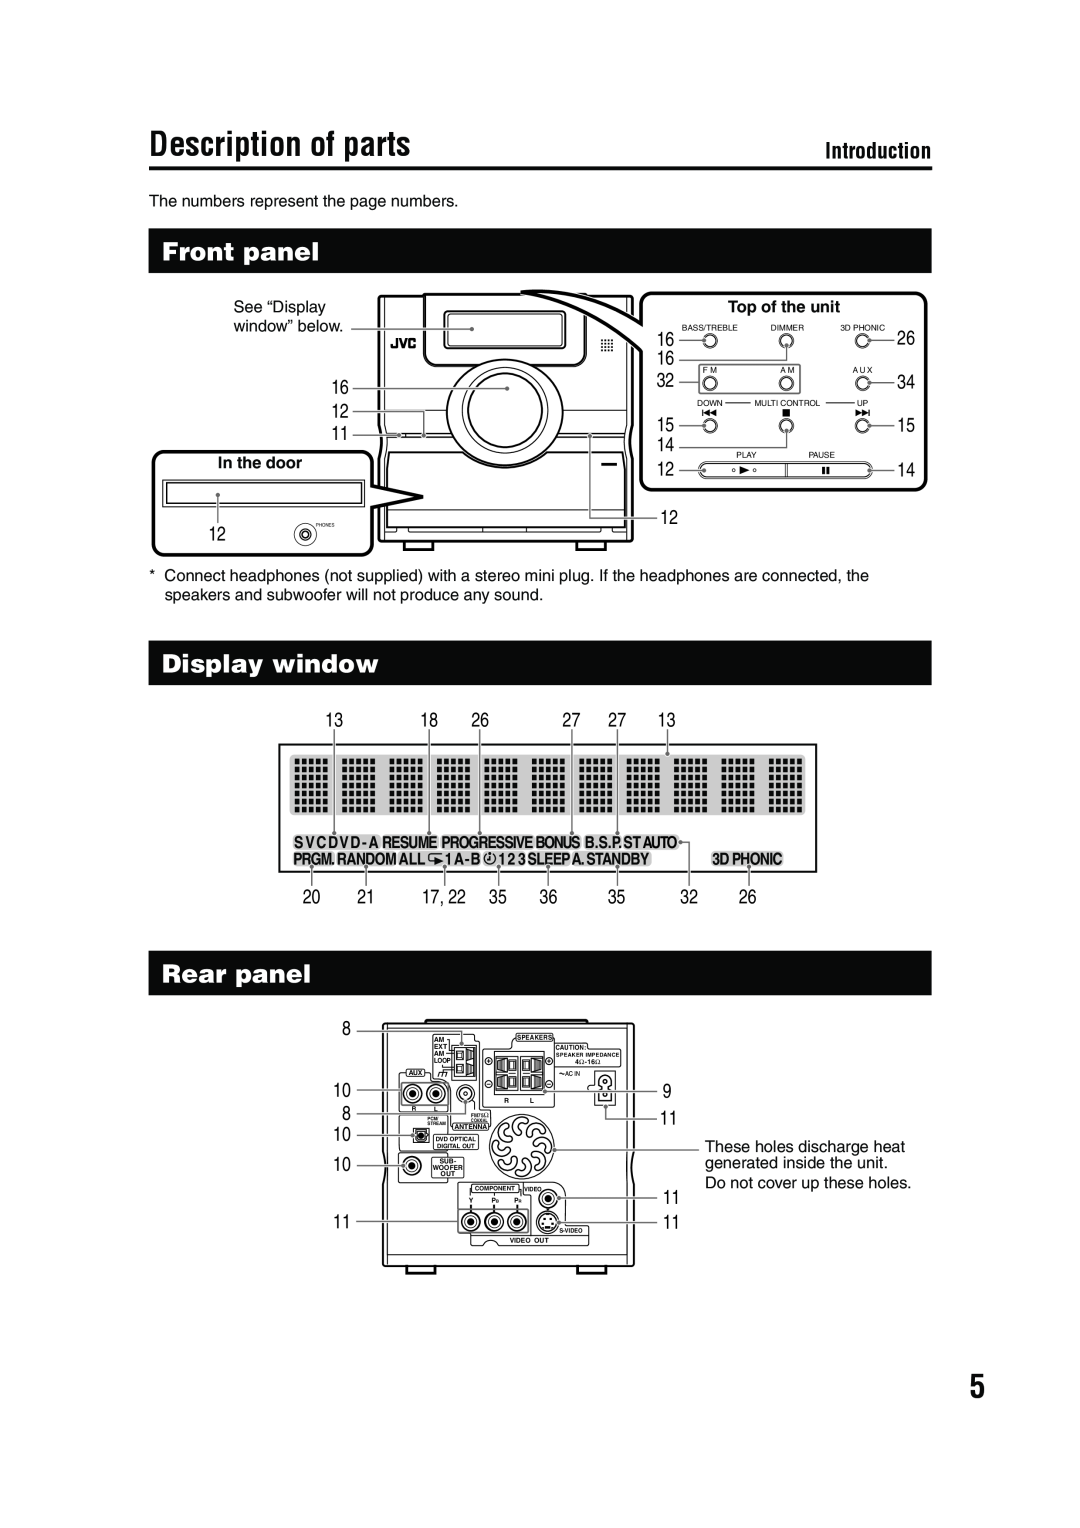 JVC GVT0142-001A manual Description of parts, Front panel, Display window, Rear panel, Introduction 